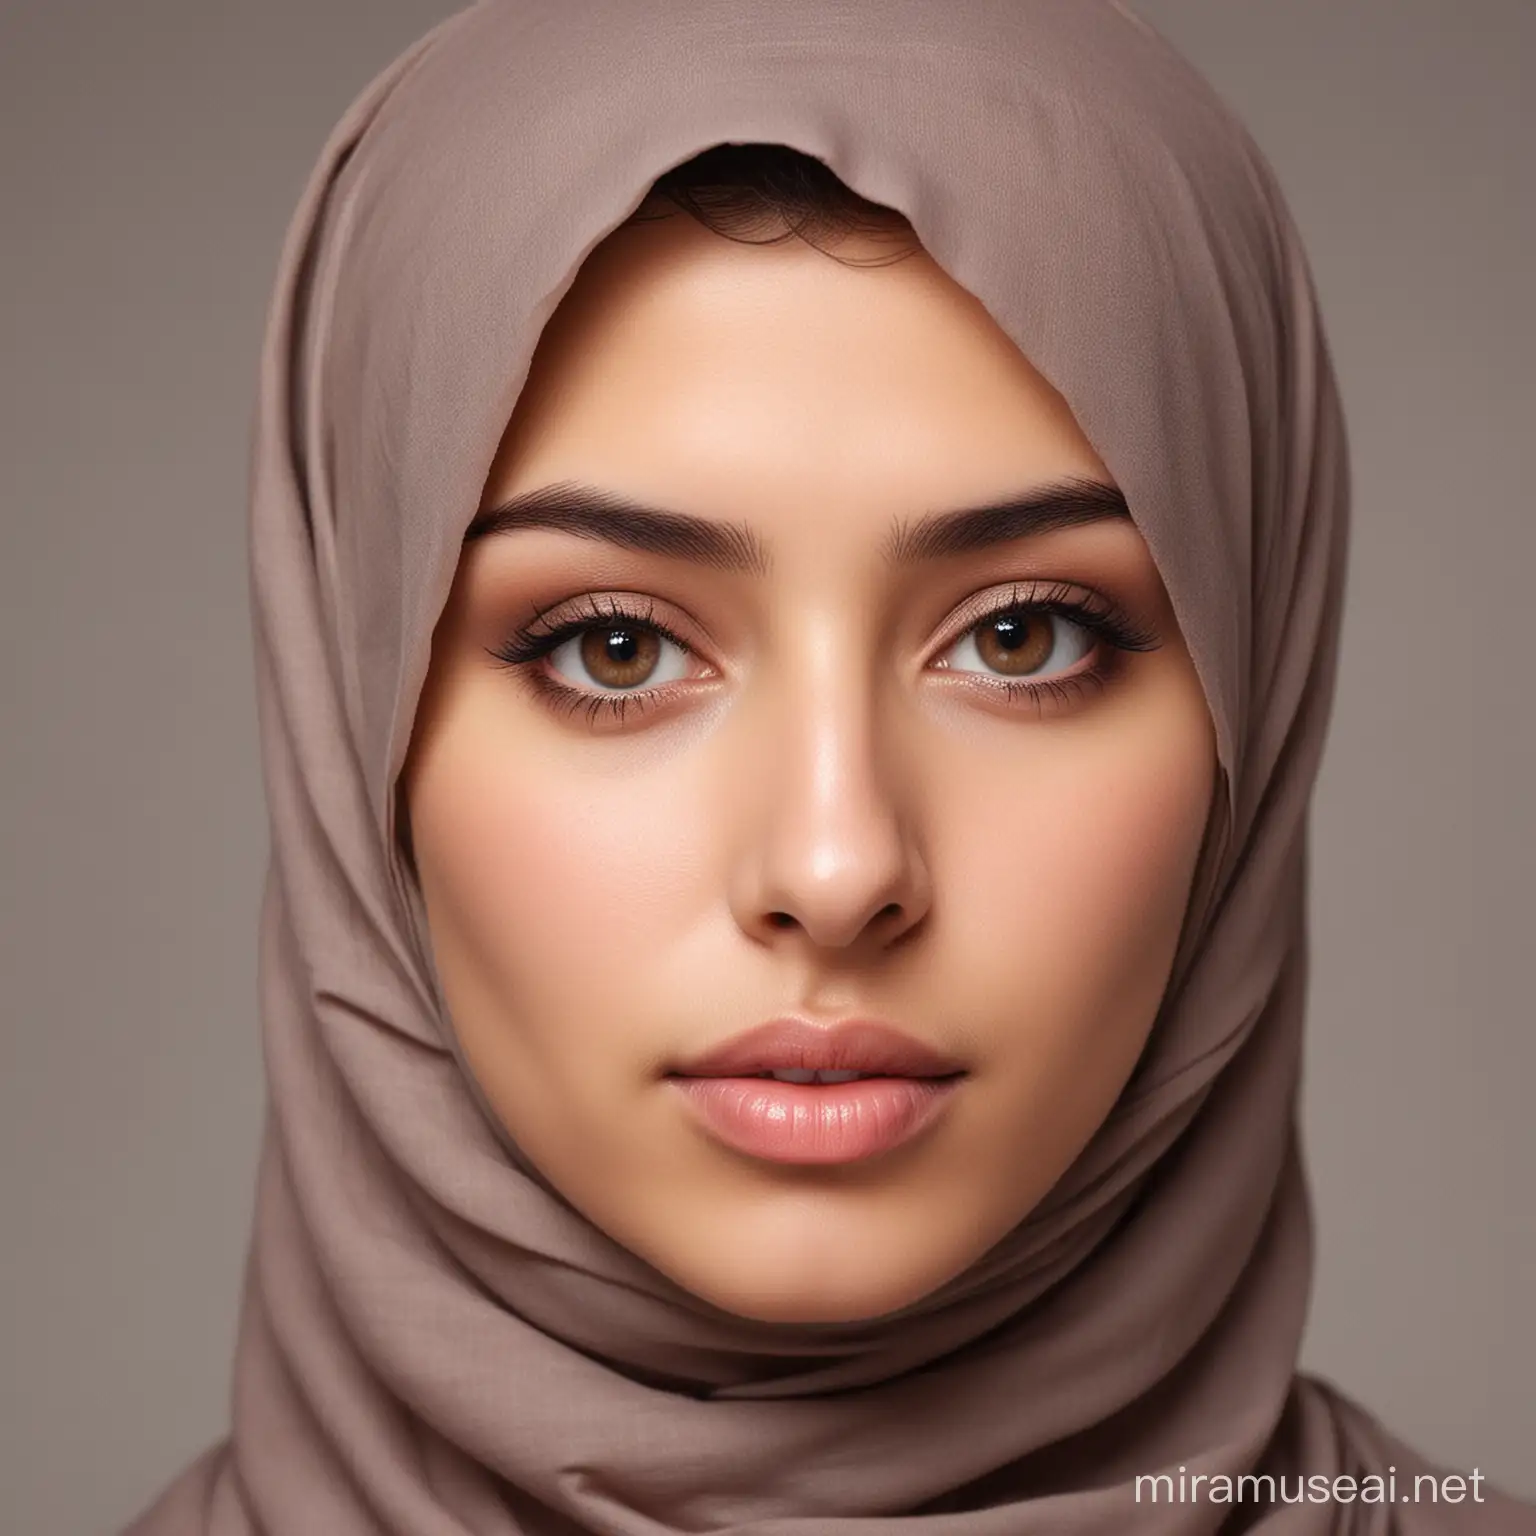 A girl with a thin and long face, small eyes, brown,and sharp, wearing hijab, her beautiful neck is showing 